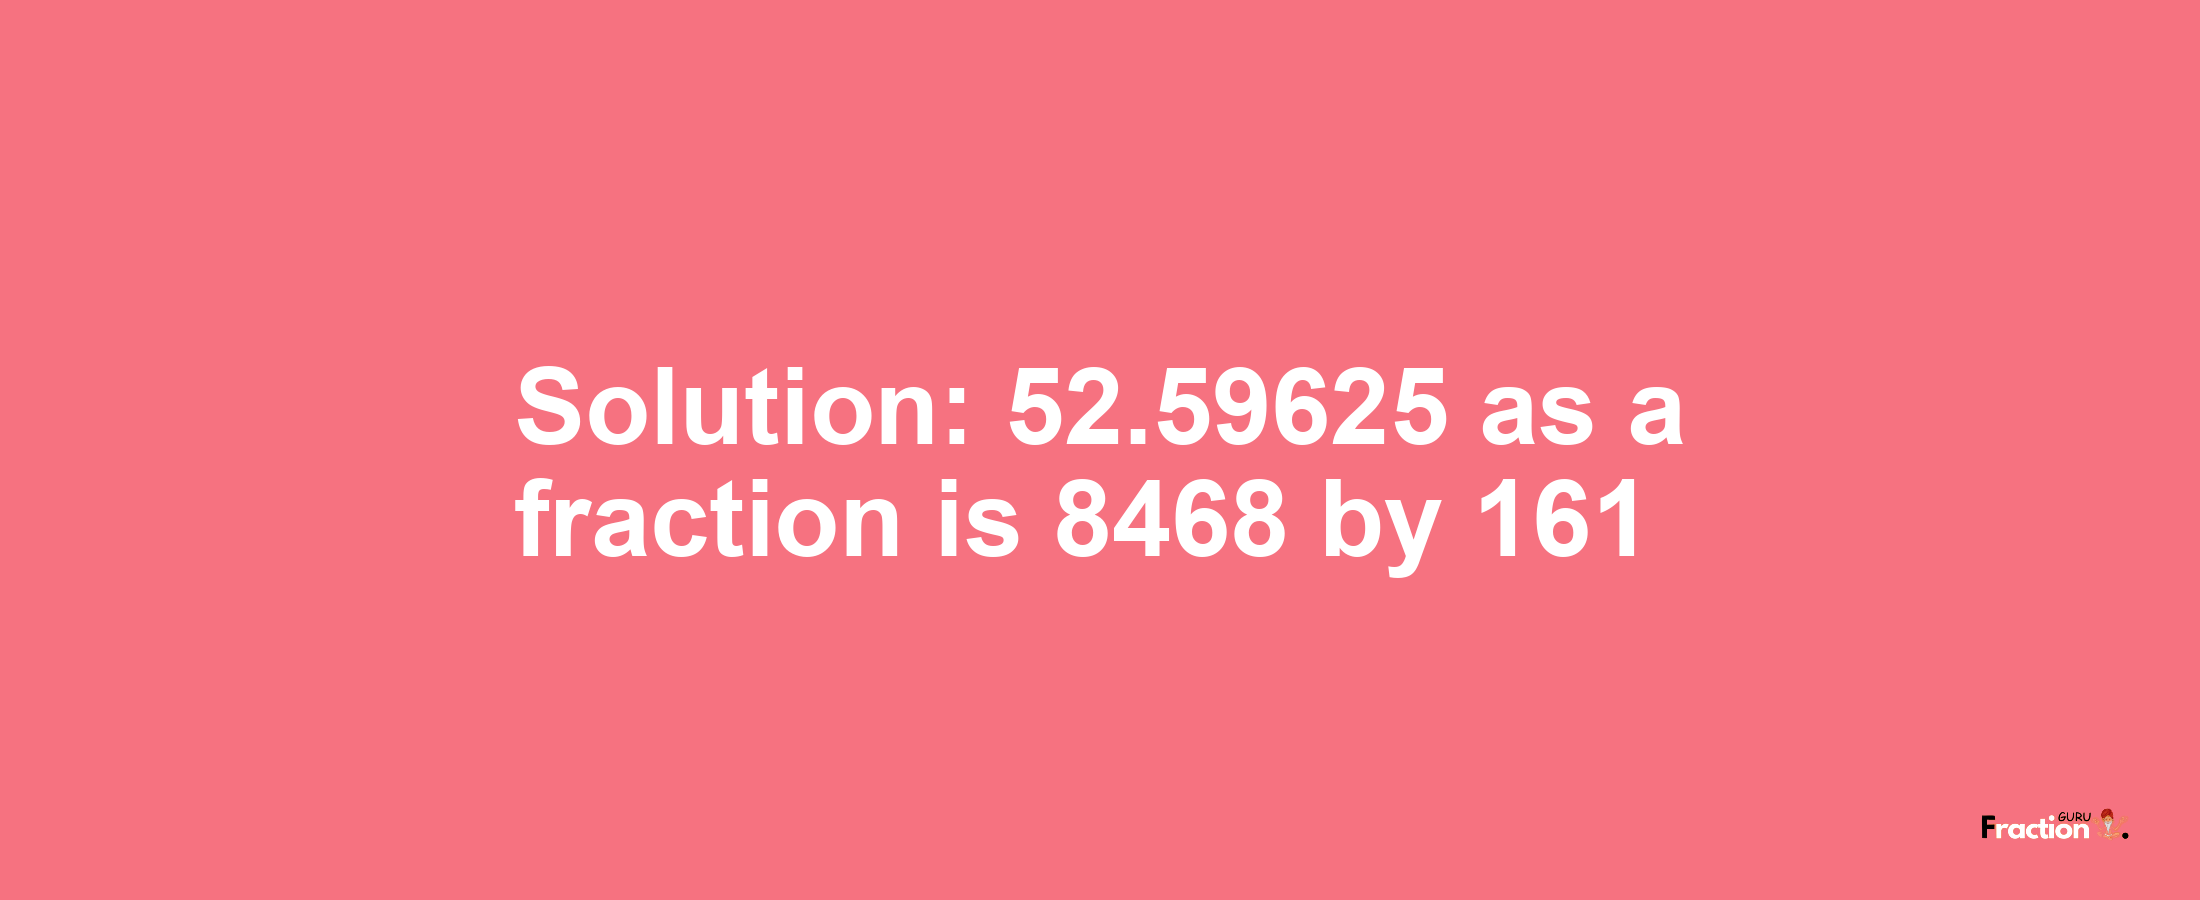 Solution:52.59625 as a fraction is 8468/161